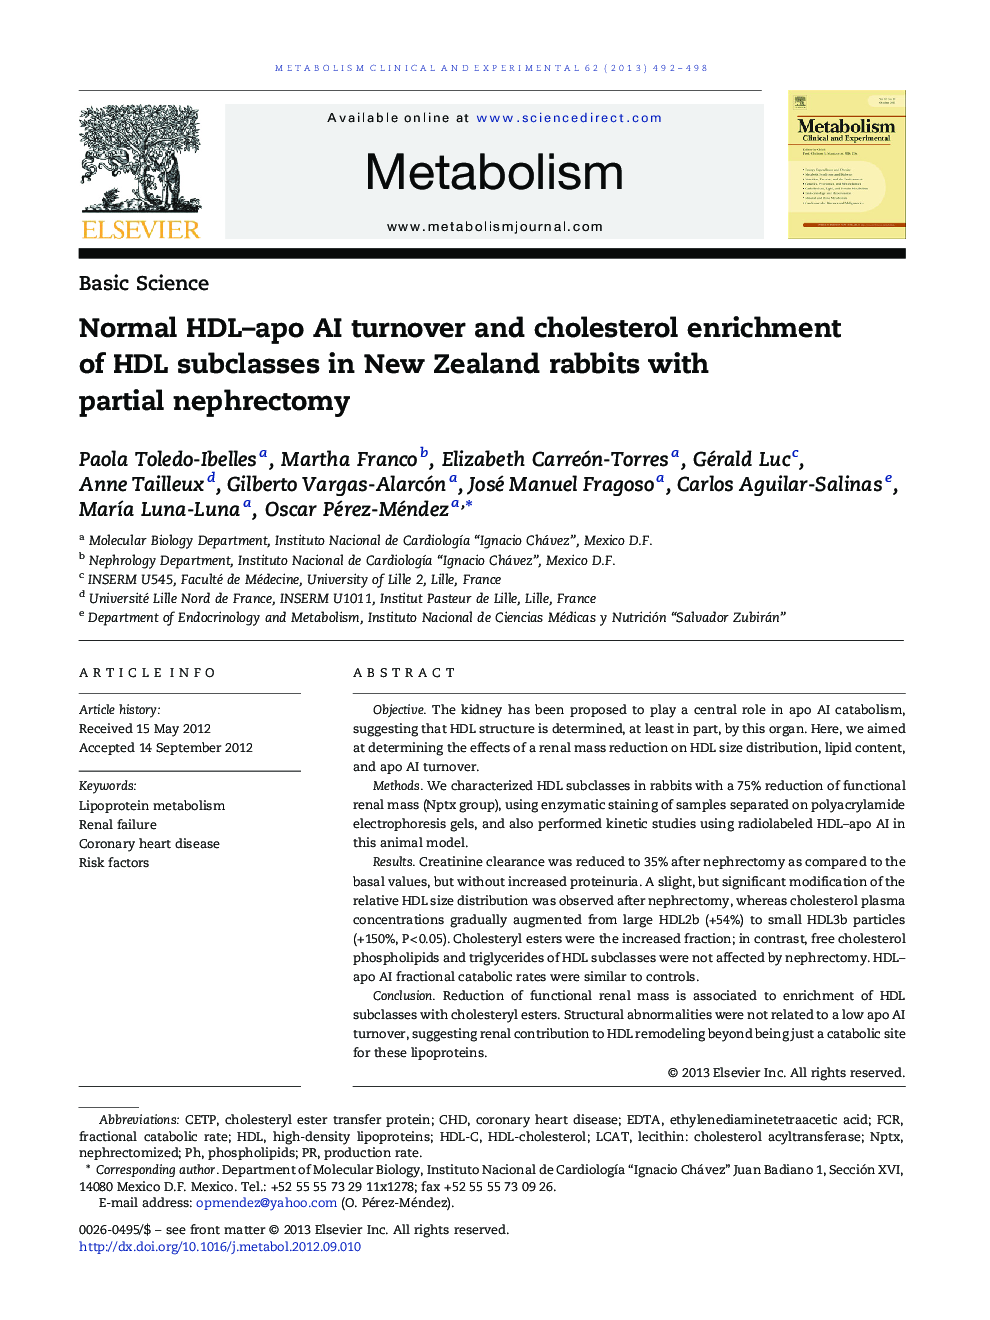 Normal HDL–apo AI turnover and cholesterol enrichment of HDL subclasses in New Zealand rabbits with partial nephrectomy